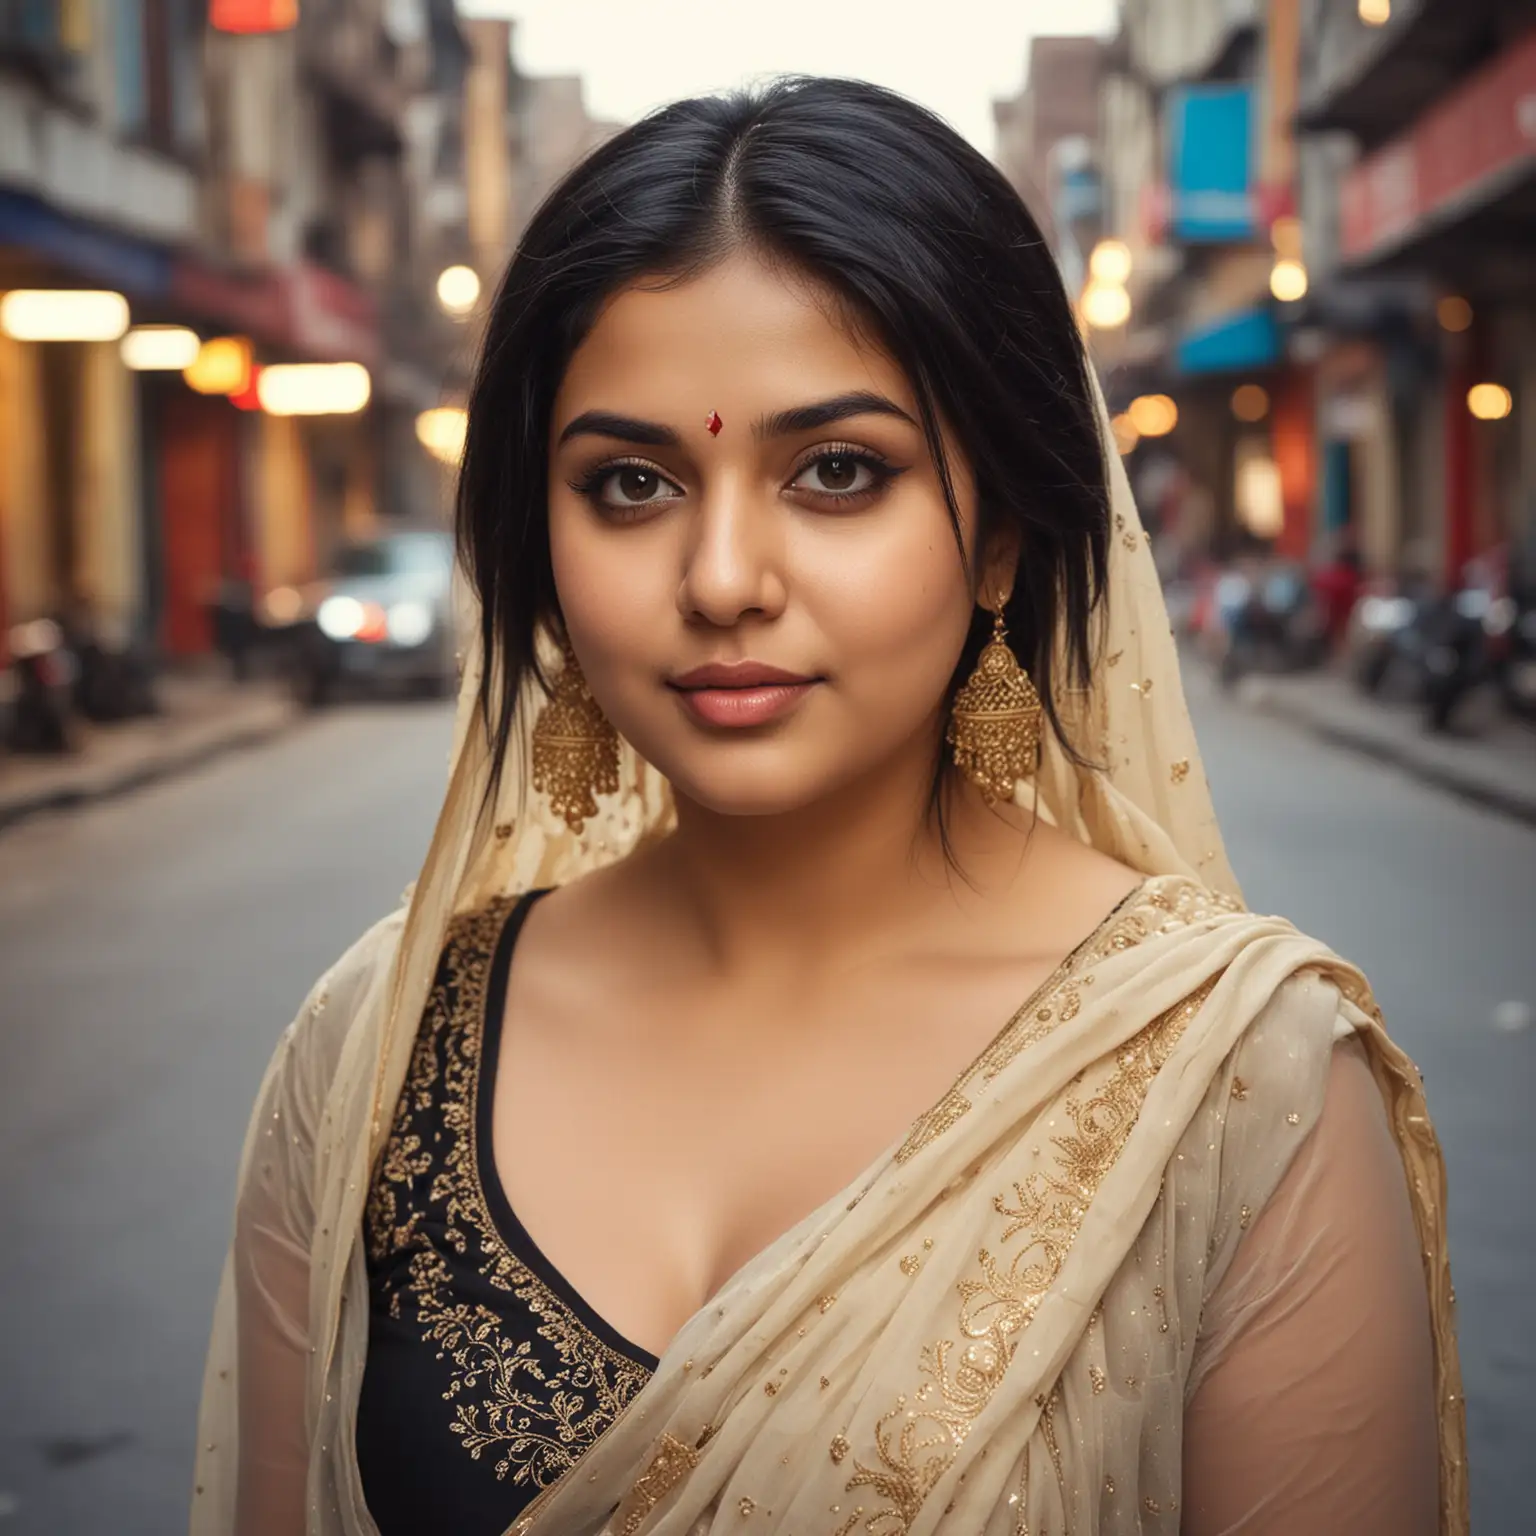 Charming-Desi-Girl-in-Deep-Neck-Top-and-Dupatta-on-City-Street